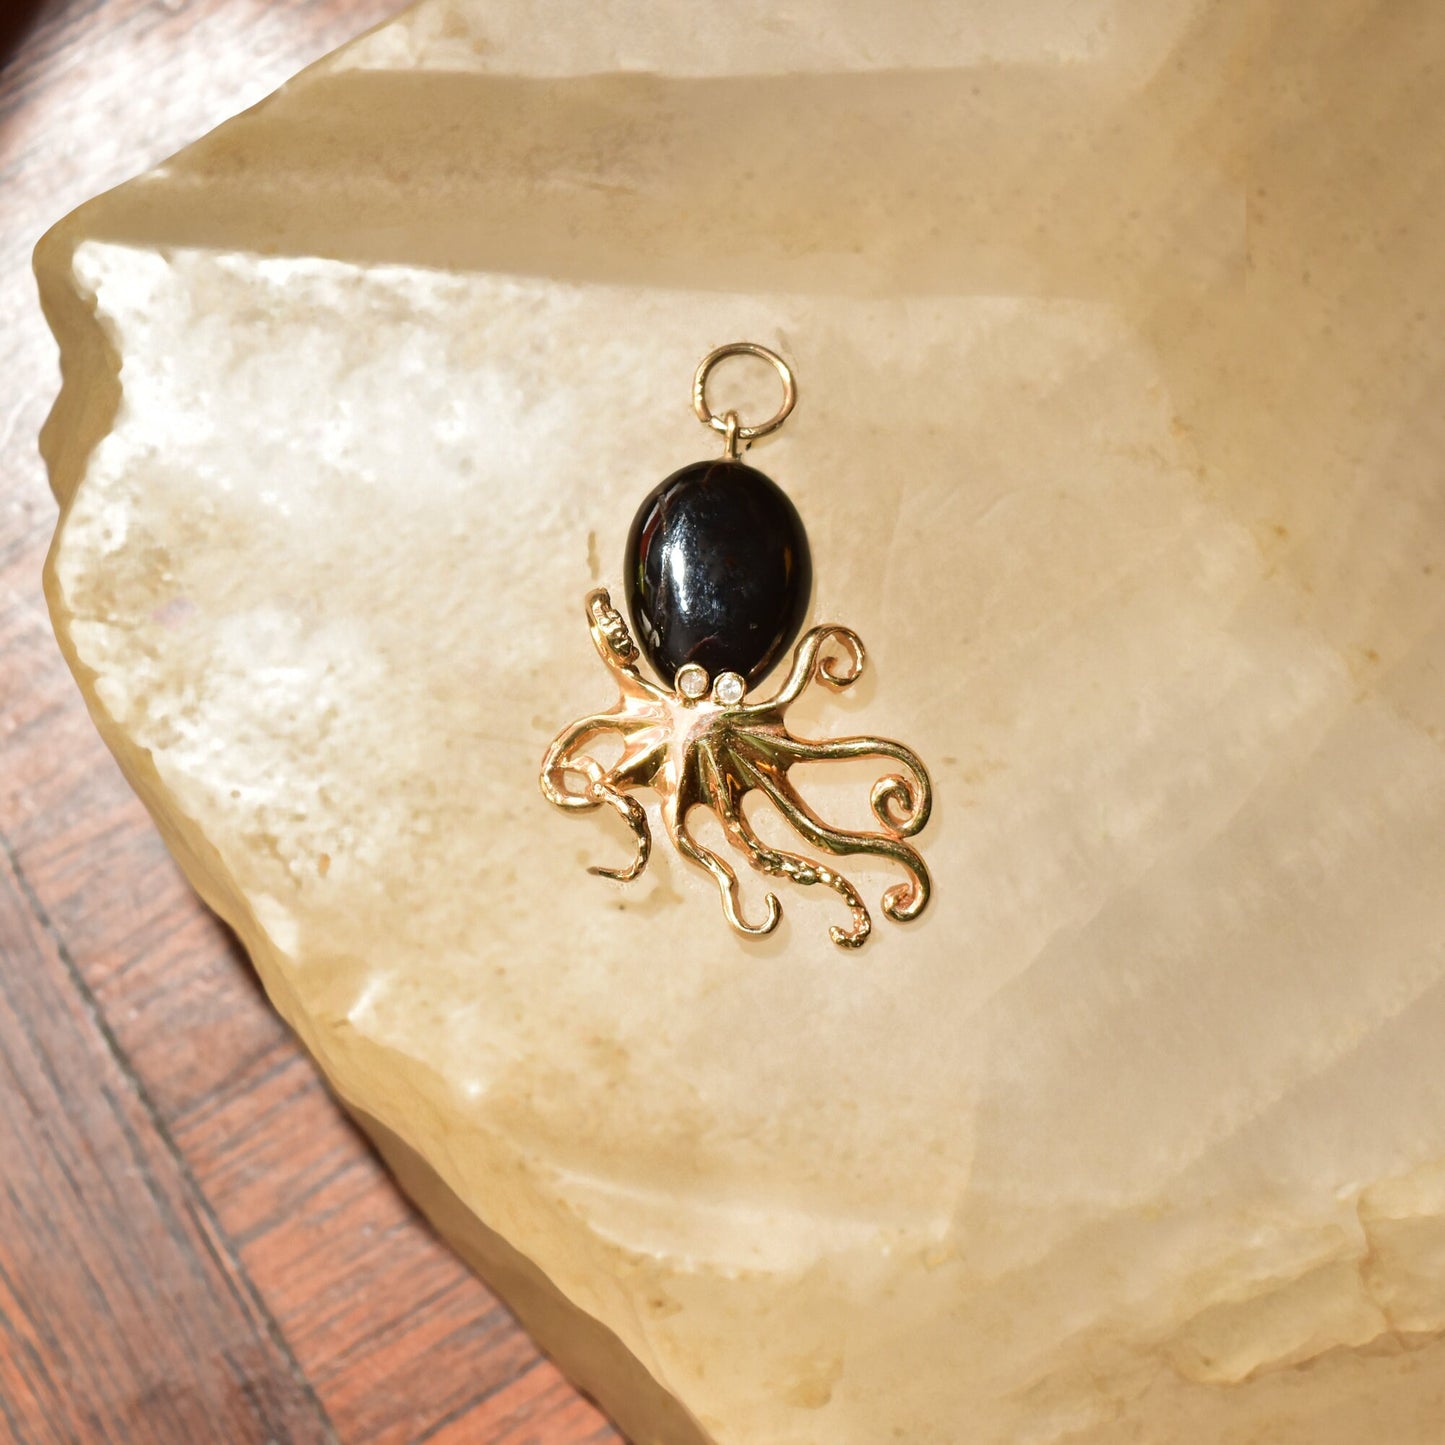 10K yellow gold octopus pendant with black coral cabochon and diamond accent, aquatic-themed 3D jewelry pendant measuring 38mm in length on crystal quartz slab